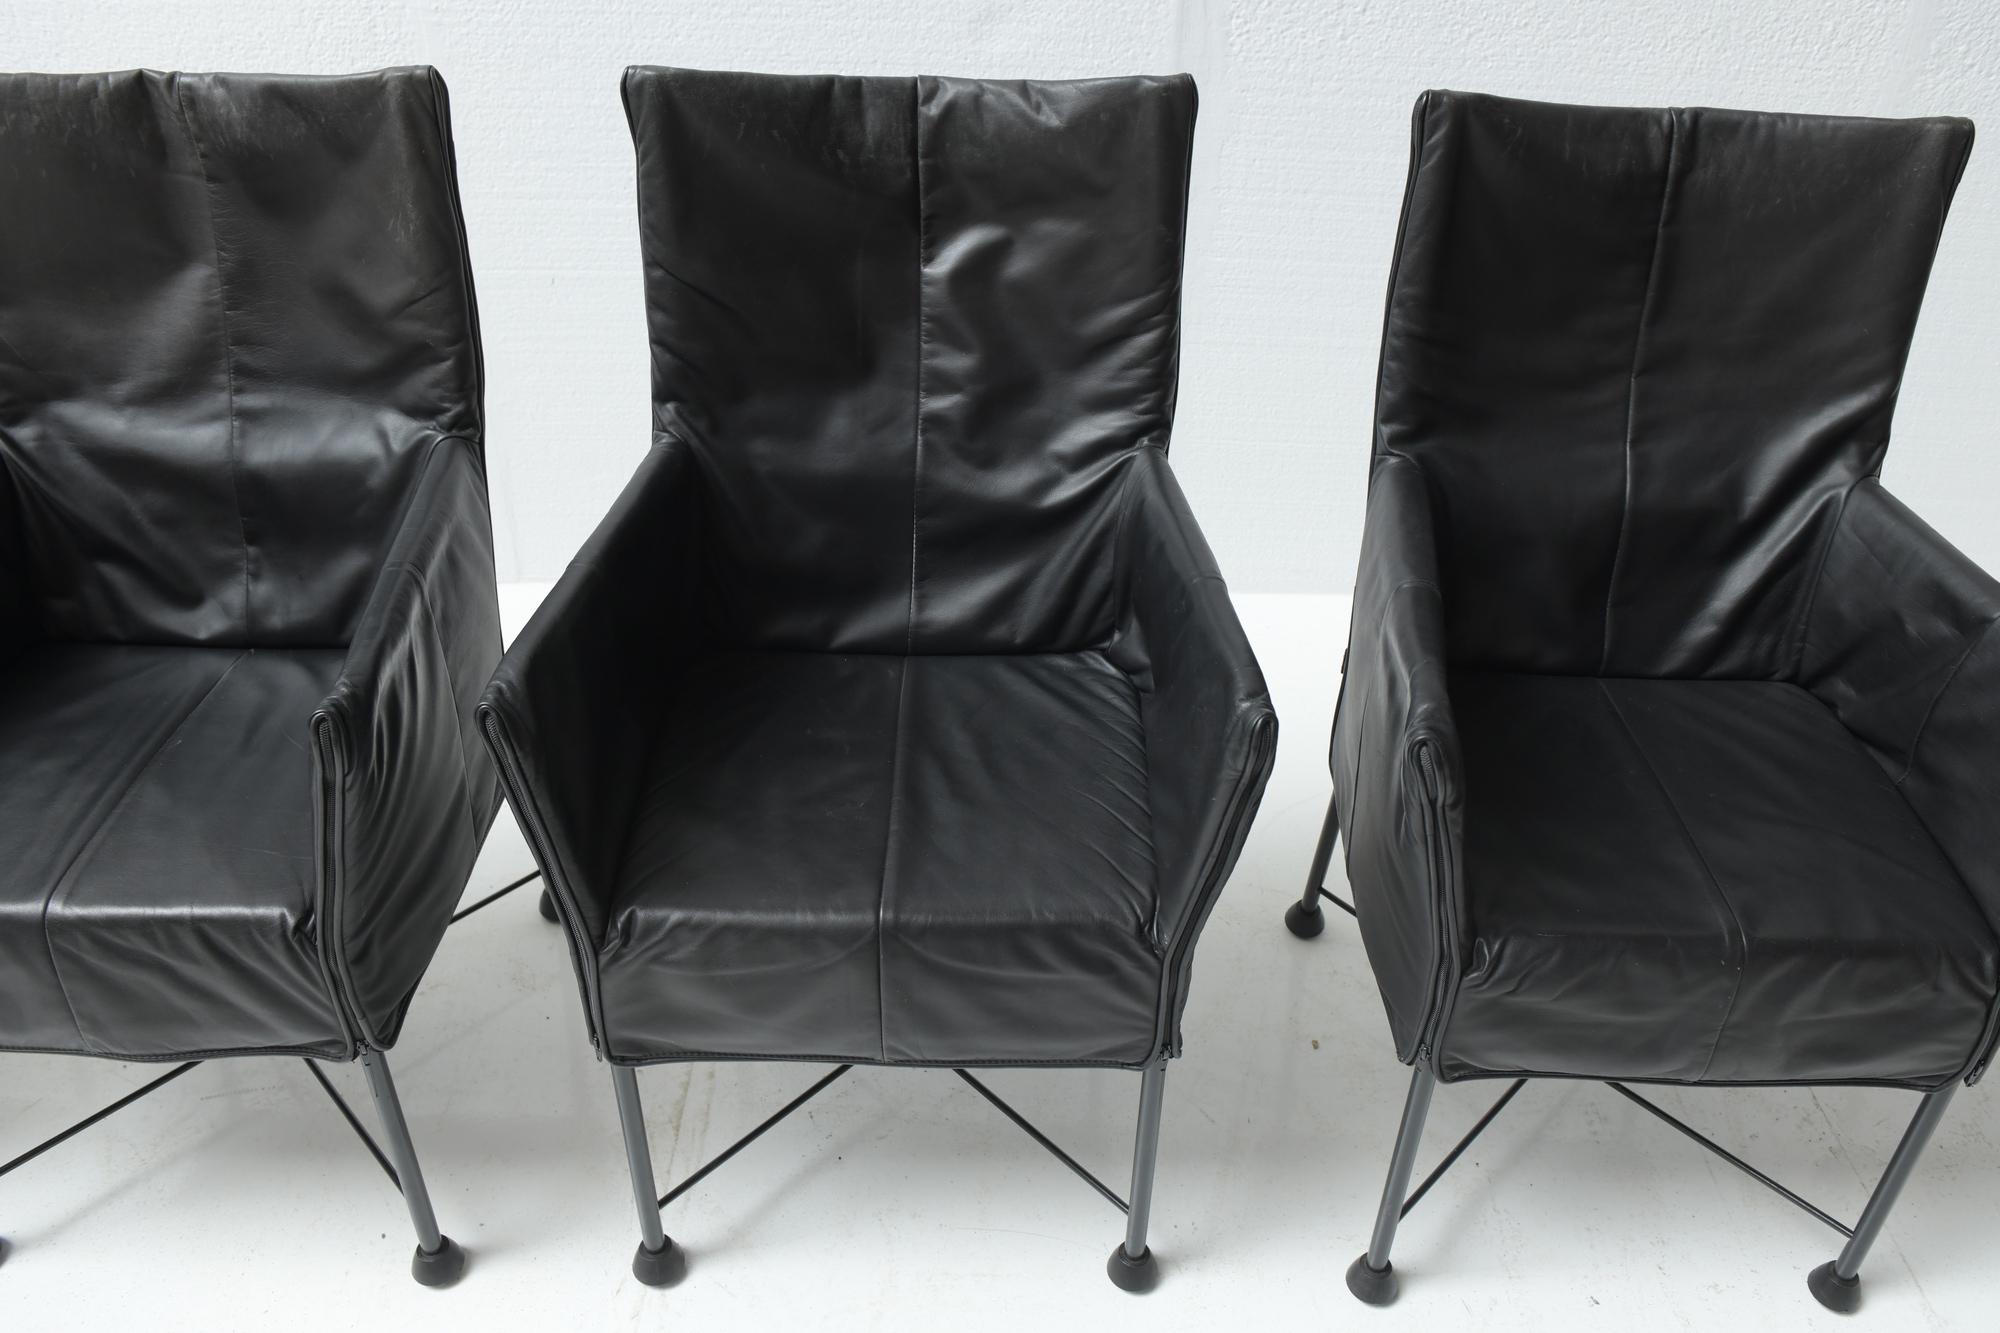 6 x Chaplin Vintage Leather Dining Chairs by Gerard van den Berg for Montis For Sale 6